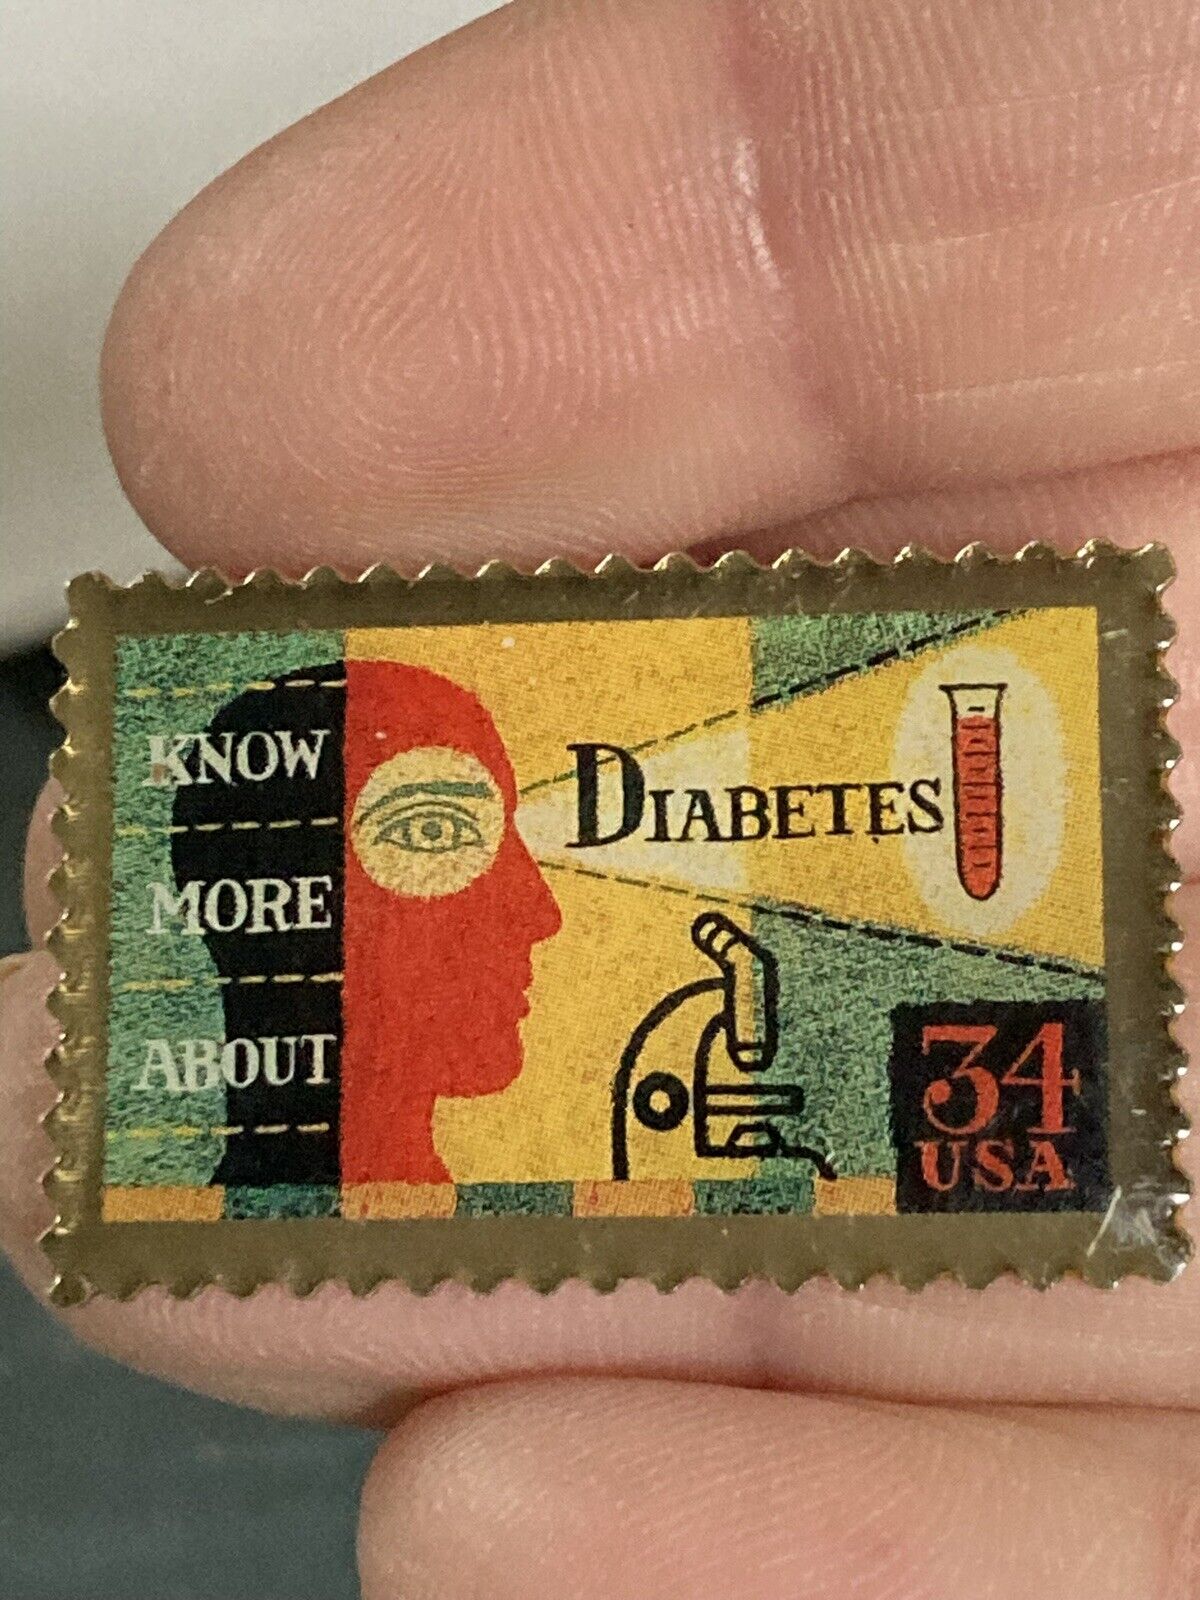 Know more about diabetes postage stamp 34cent Lapel Pin K527